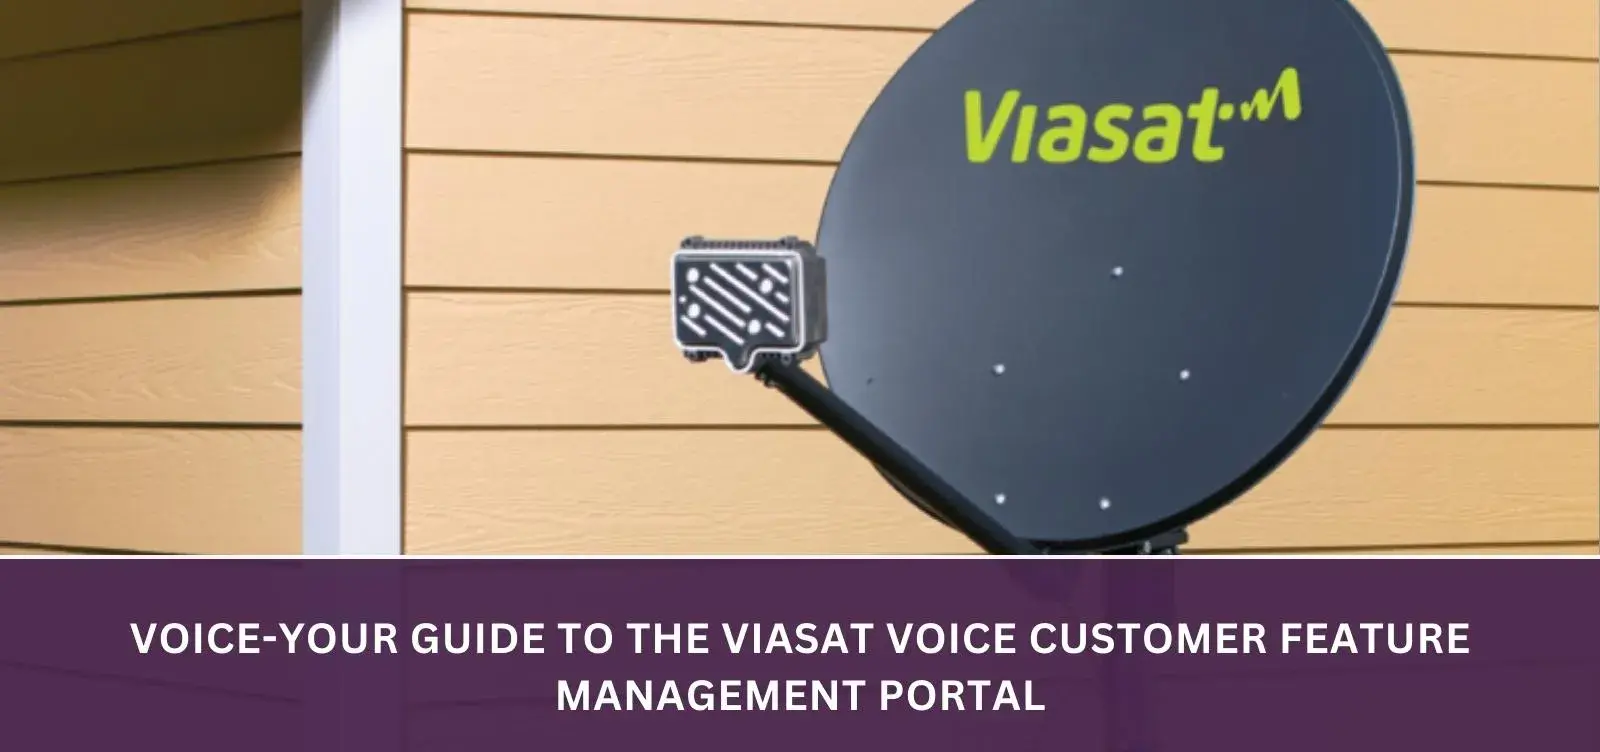 Voice-Your Guide to the Viasat Voice Customer Feature Management Portal